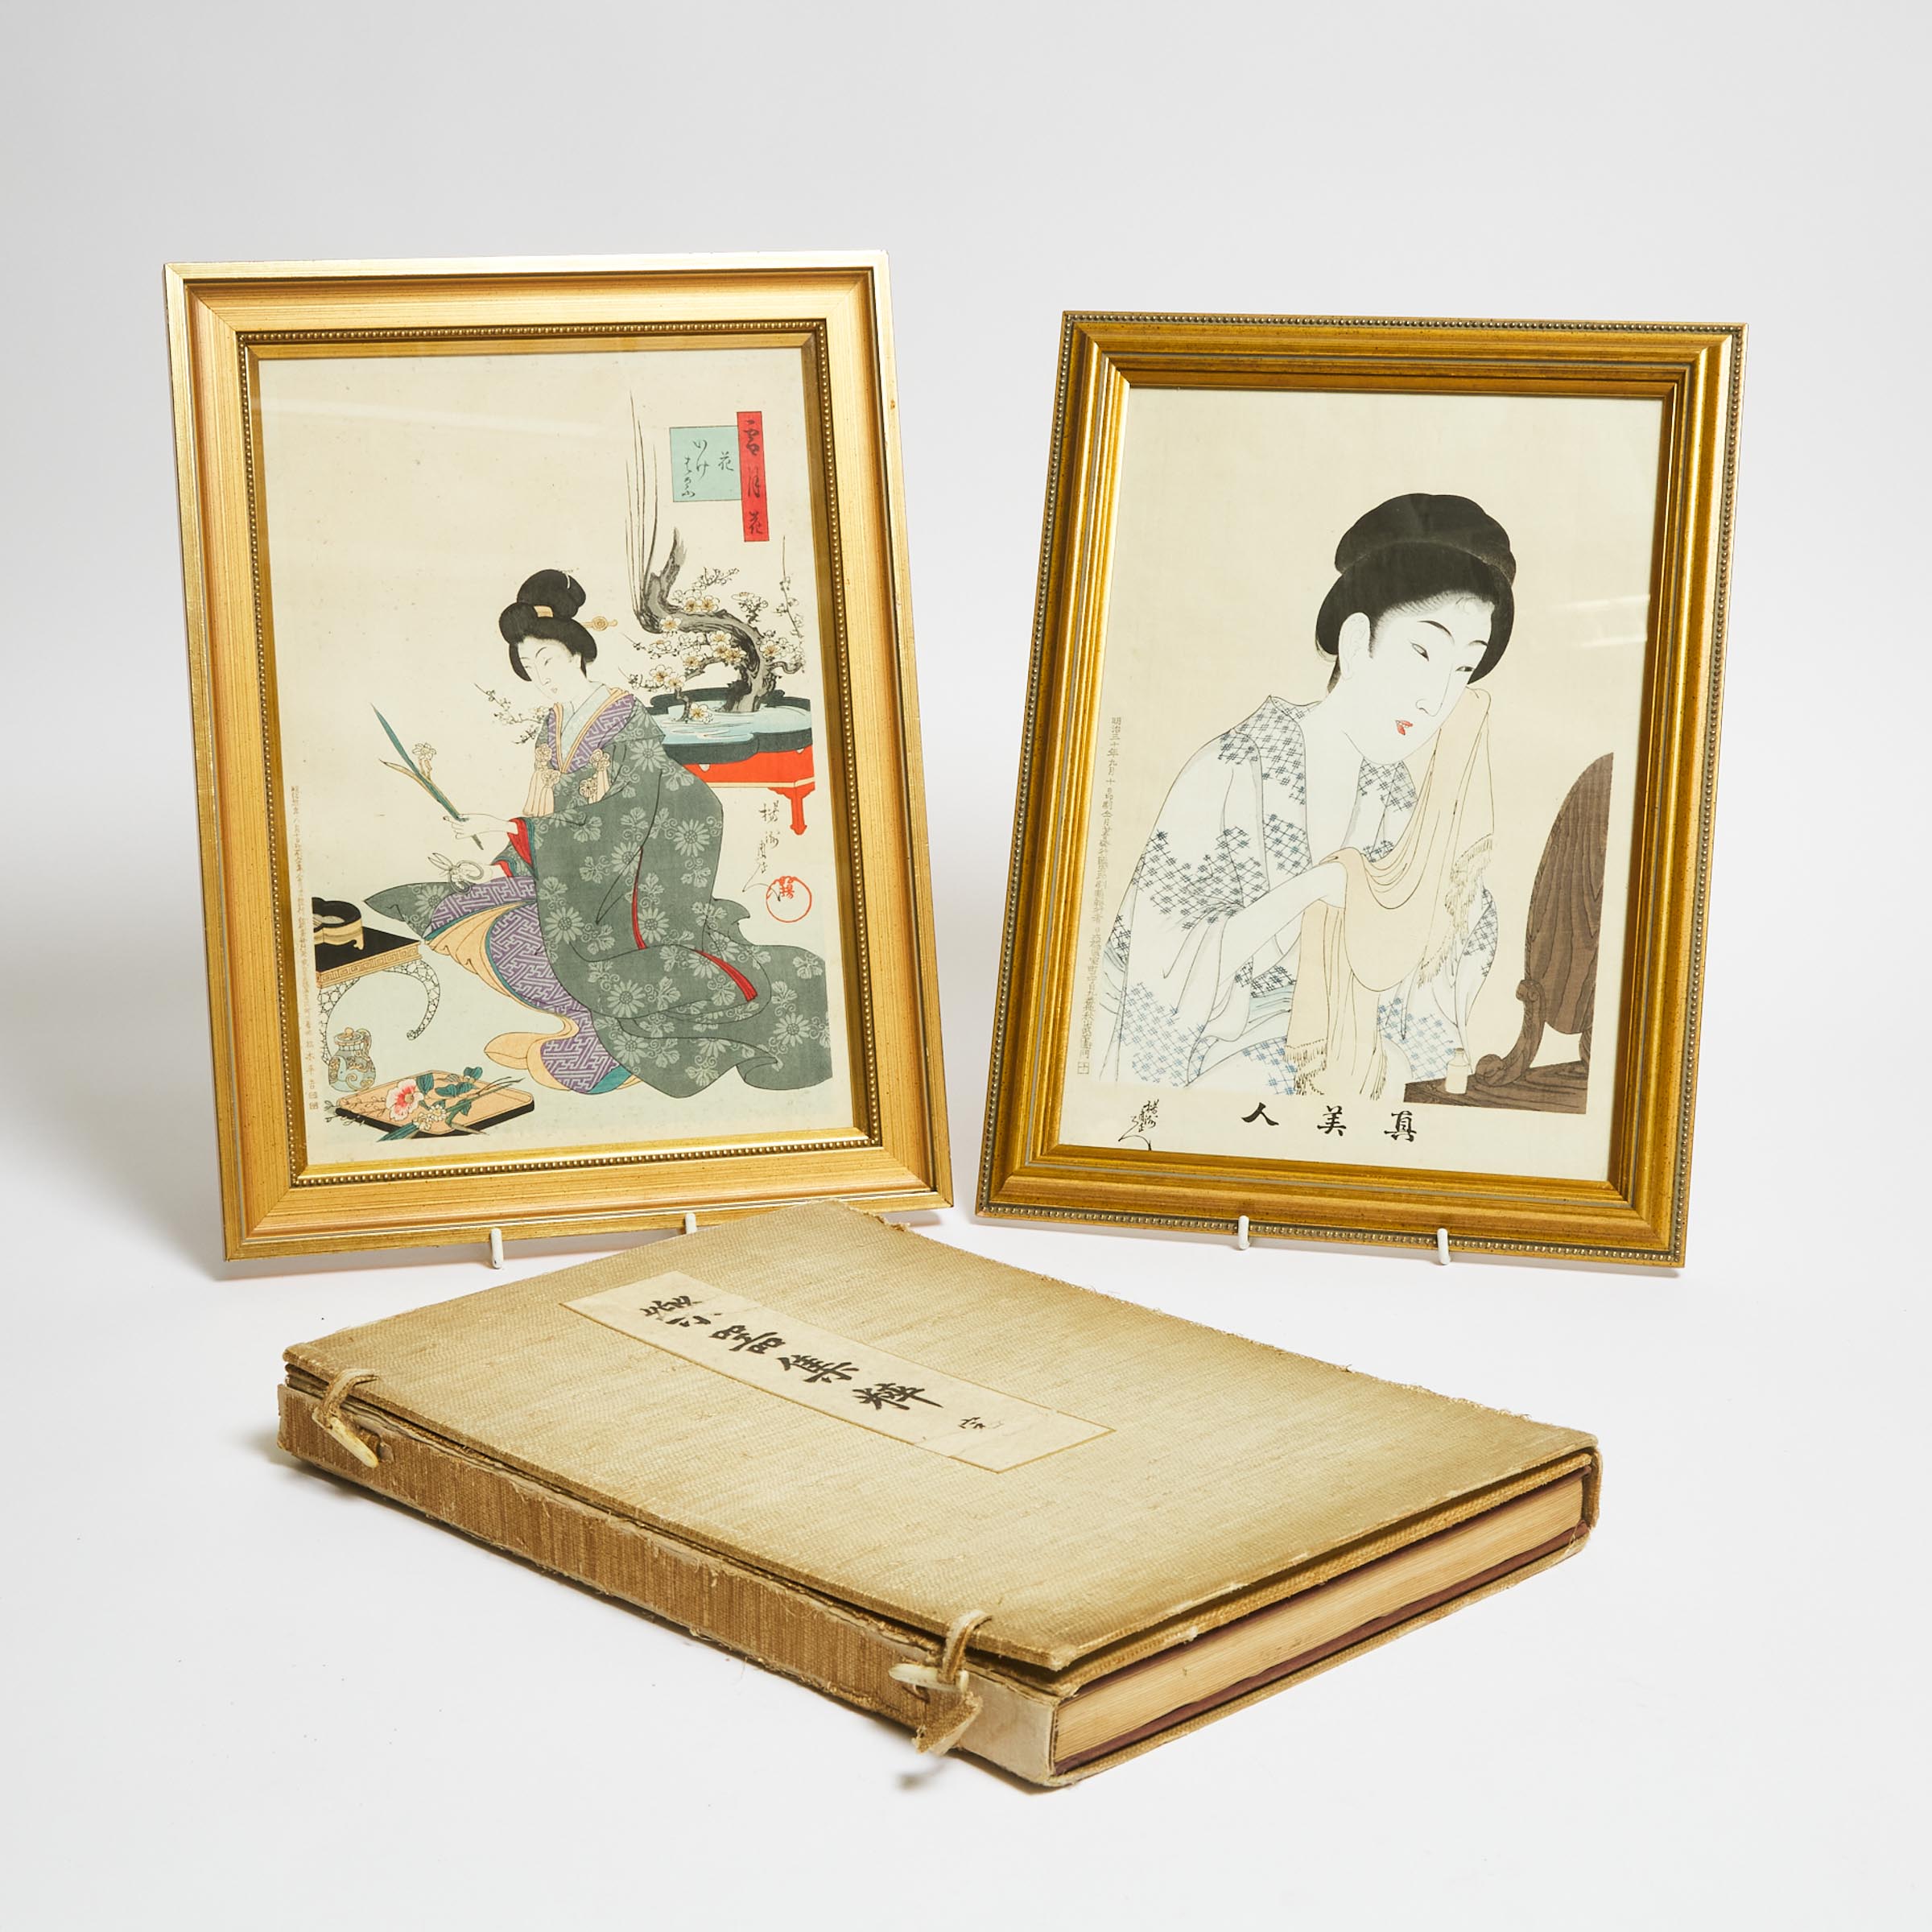 Toyohara Chikanobu (1838-1912), Two Woodblock Prints of Ladies, Together With an Album of Japanese Musical Instruments, Published in 1929